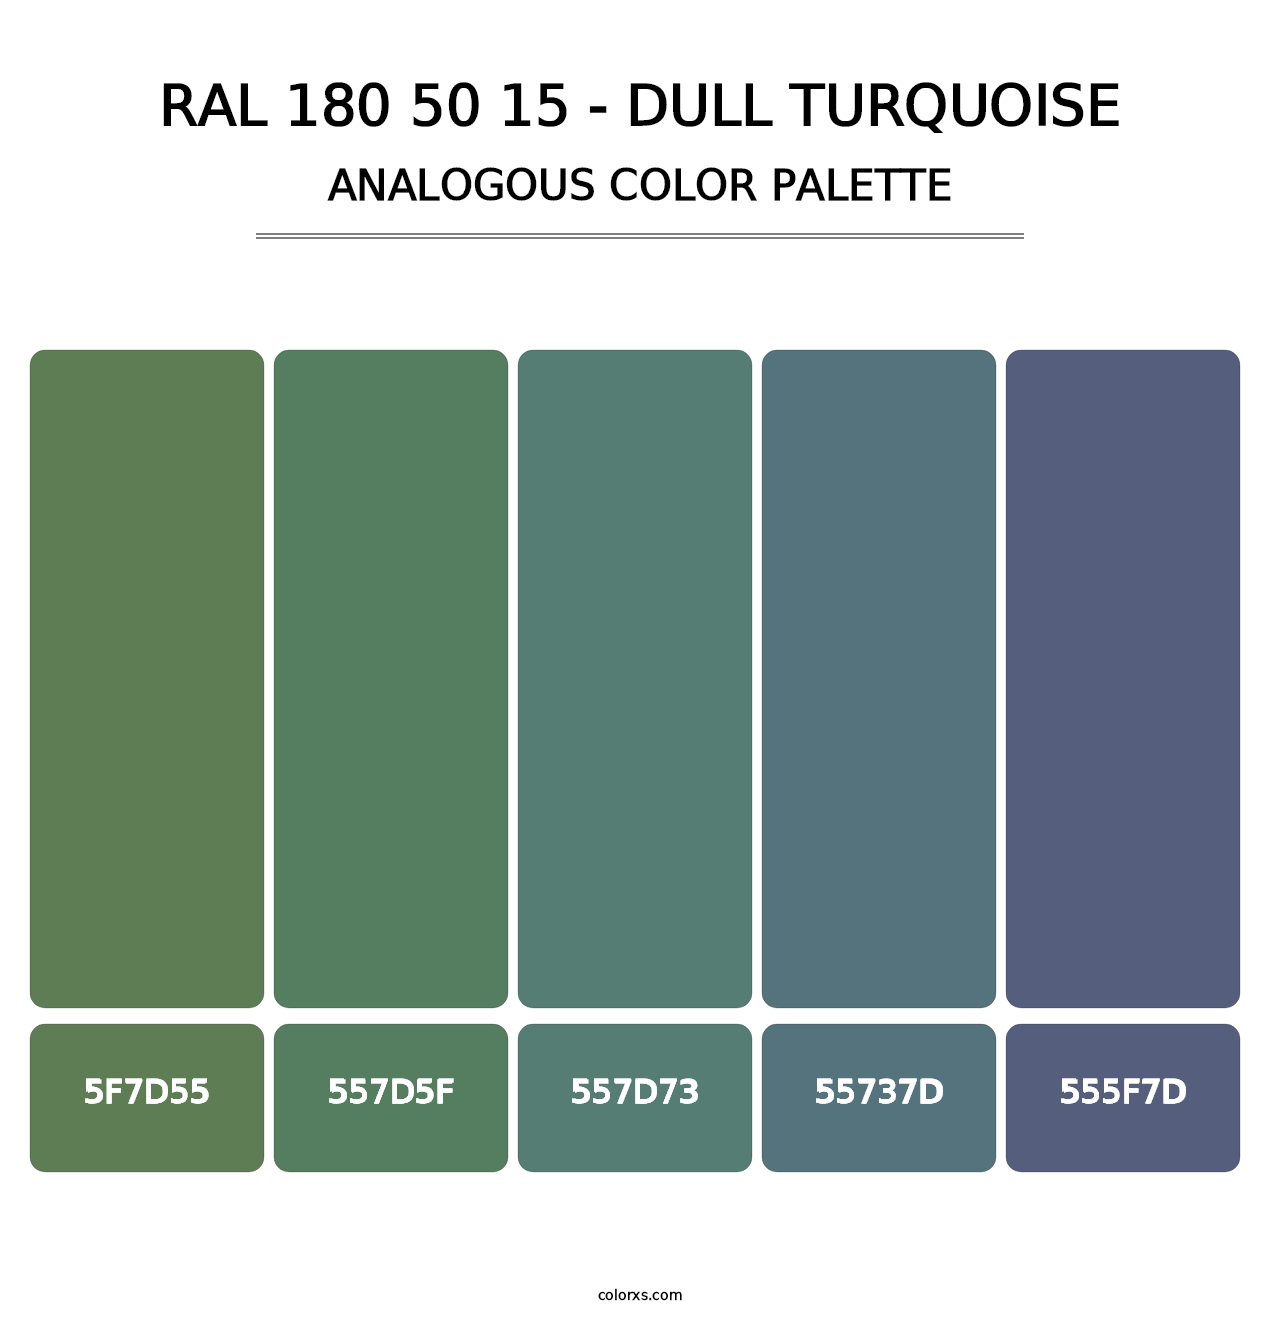 RAL 180 50 15 - Dull Turquoise - Analogous Color Palette